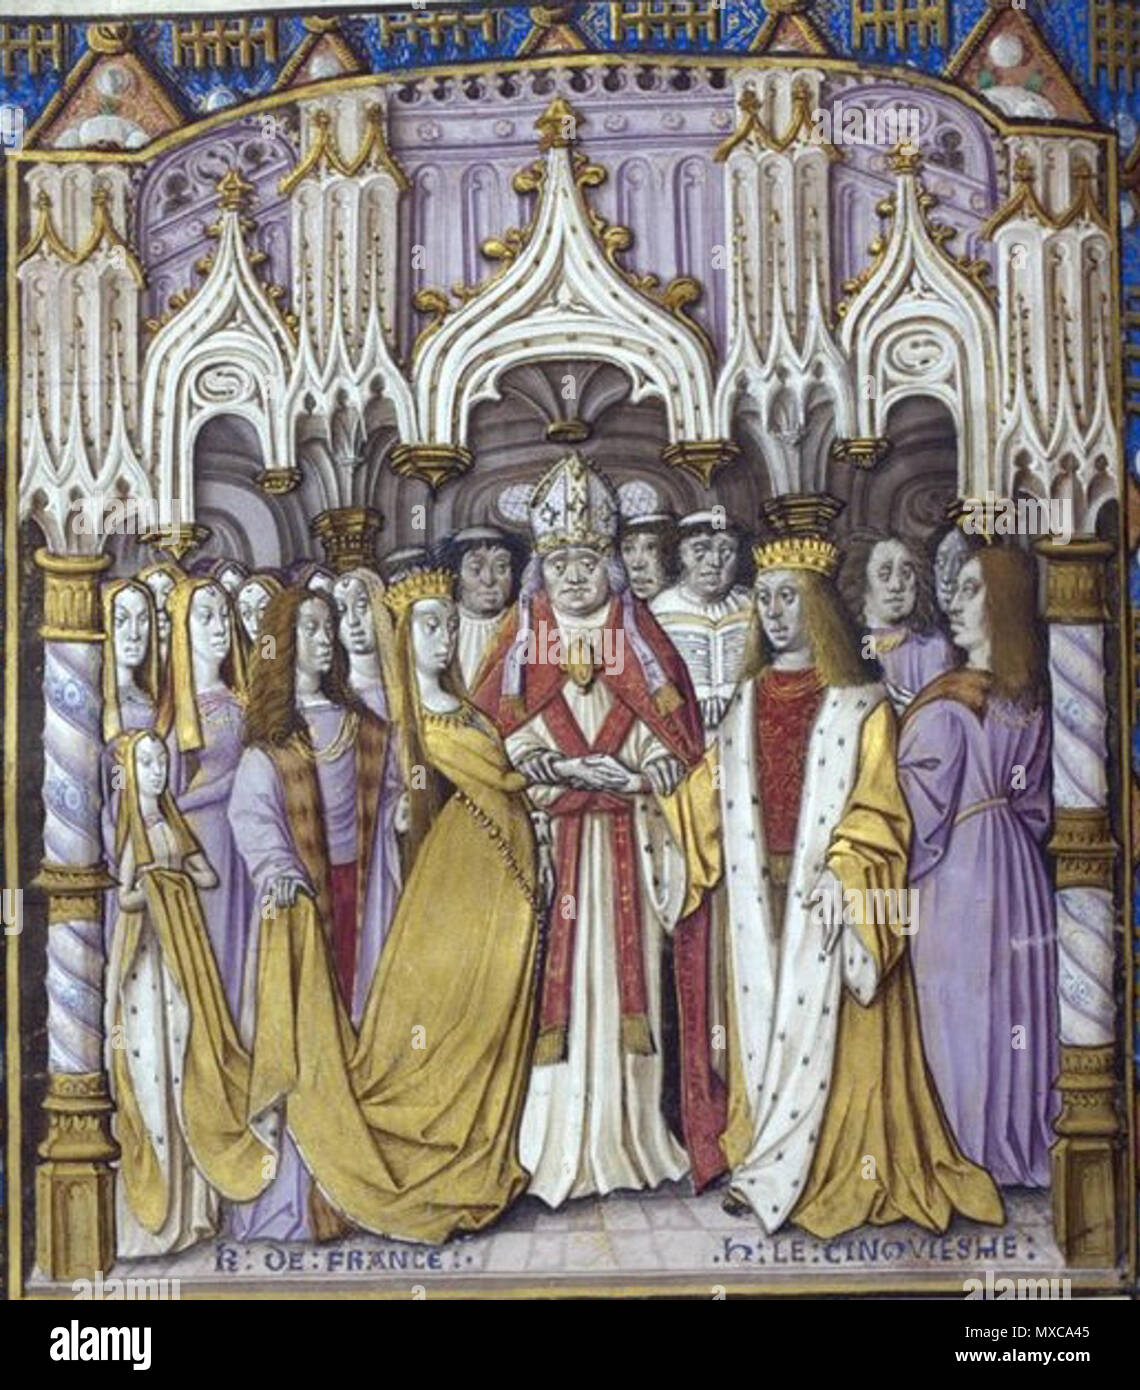 . Marriage of Henry V of England to Catherine of Valois British Library, Miniature of the marriage of Henry V and Catharine de Valois: Jean Chartier, Chronique de Charles VII, France (Calais), 1490, and England, before 1494, Royal 20 E. vi, f. 9v, . before 1494. Unknown 400 Marriage of henry and Catherine Stock Photo